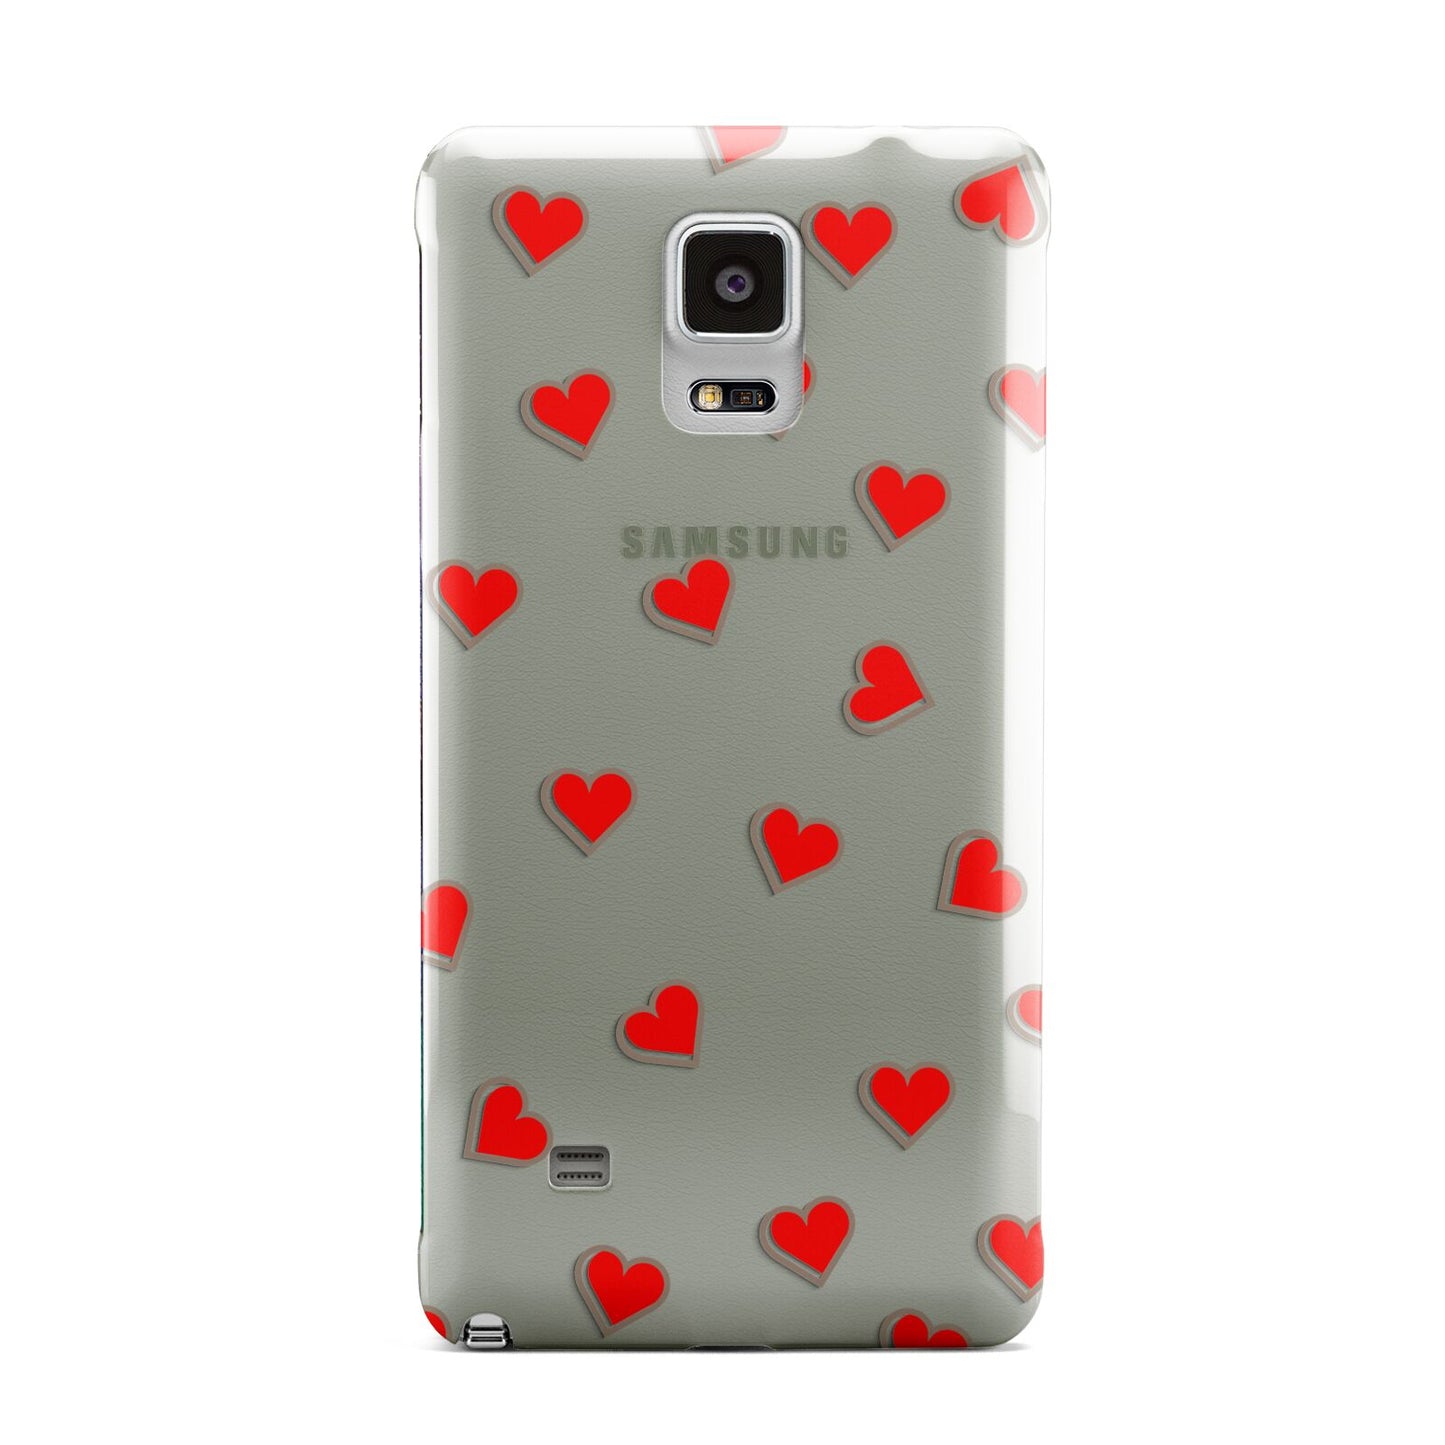 Cute Red Hearts Samsung Galaxy Note 4 Case